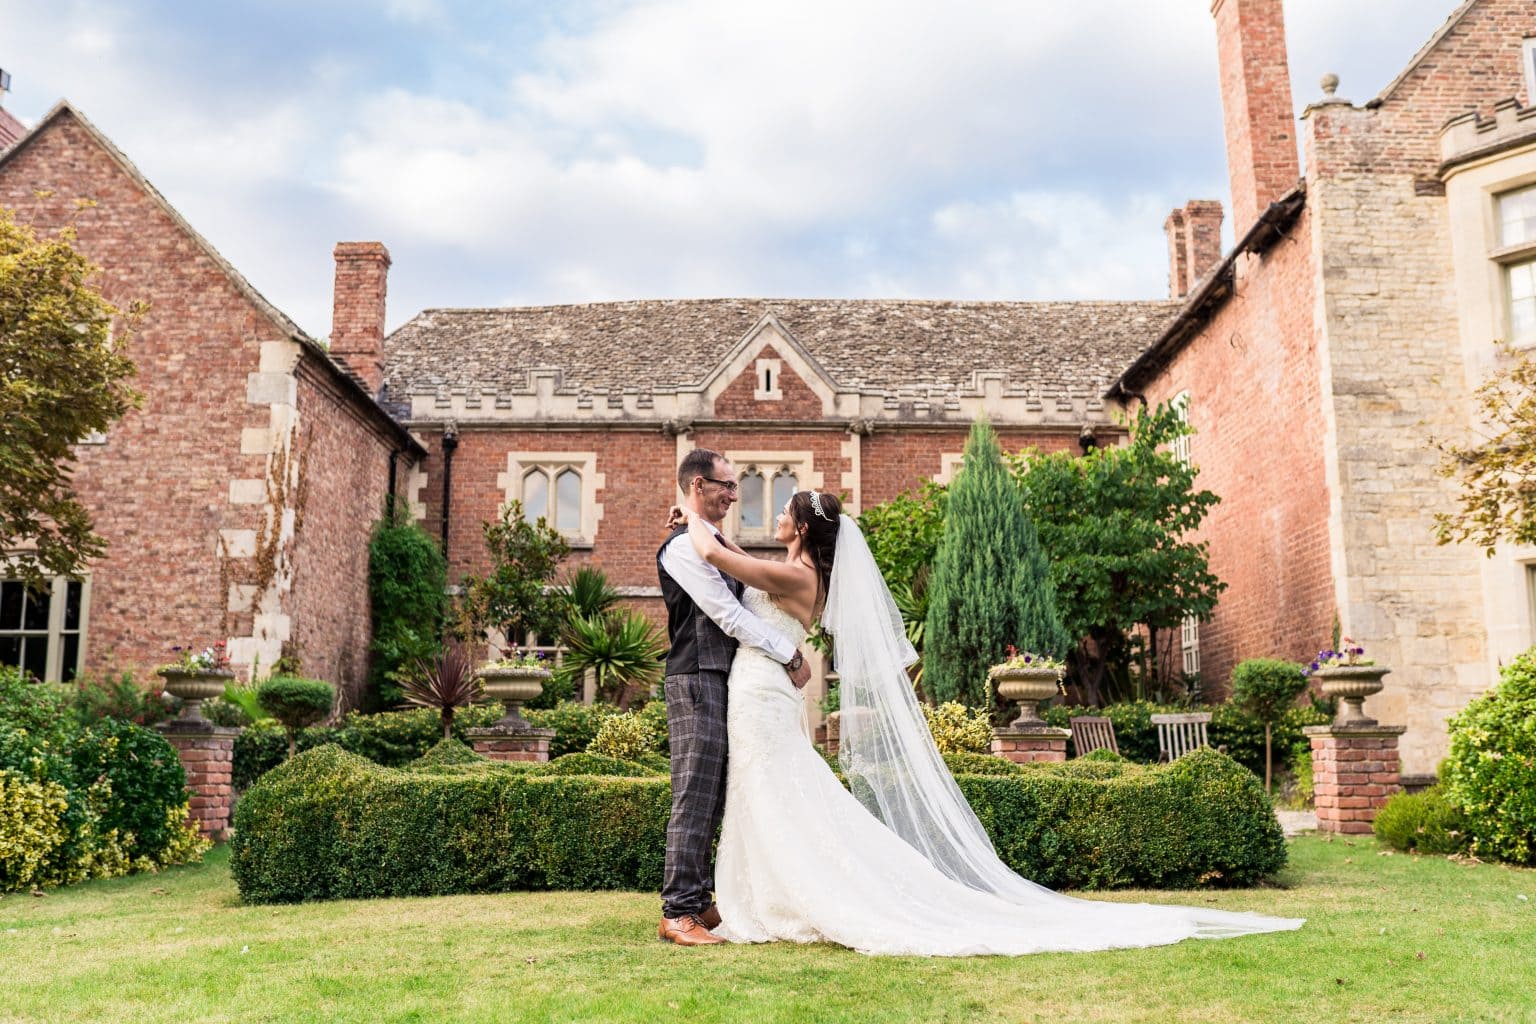 Priors Court Tithe Barn wedding portrait. Captured by Pedge Photography